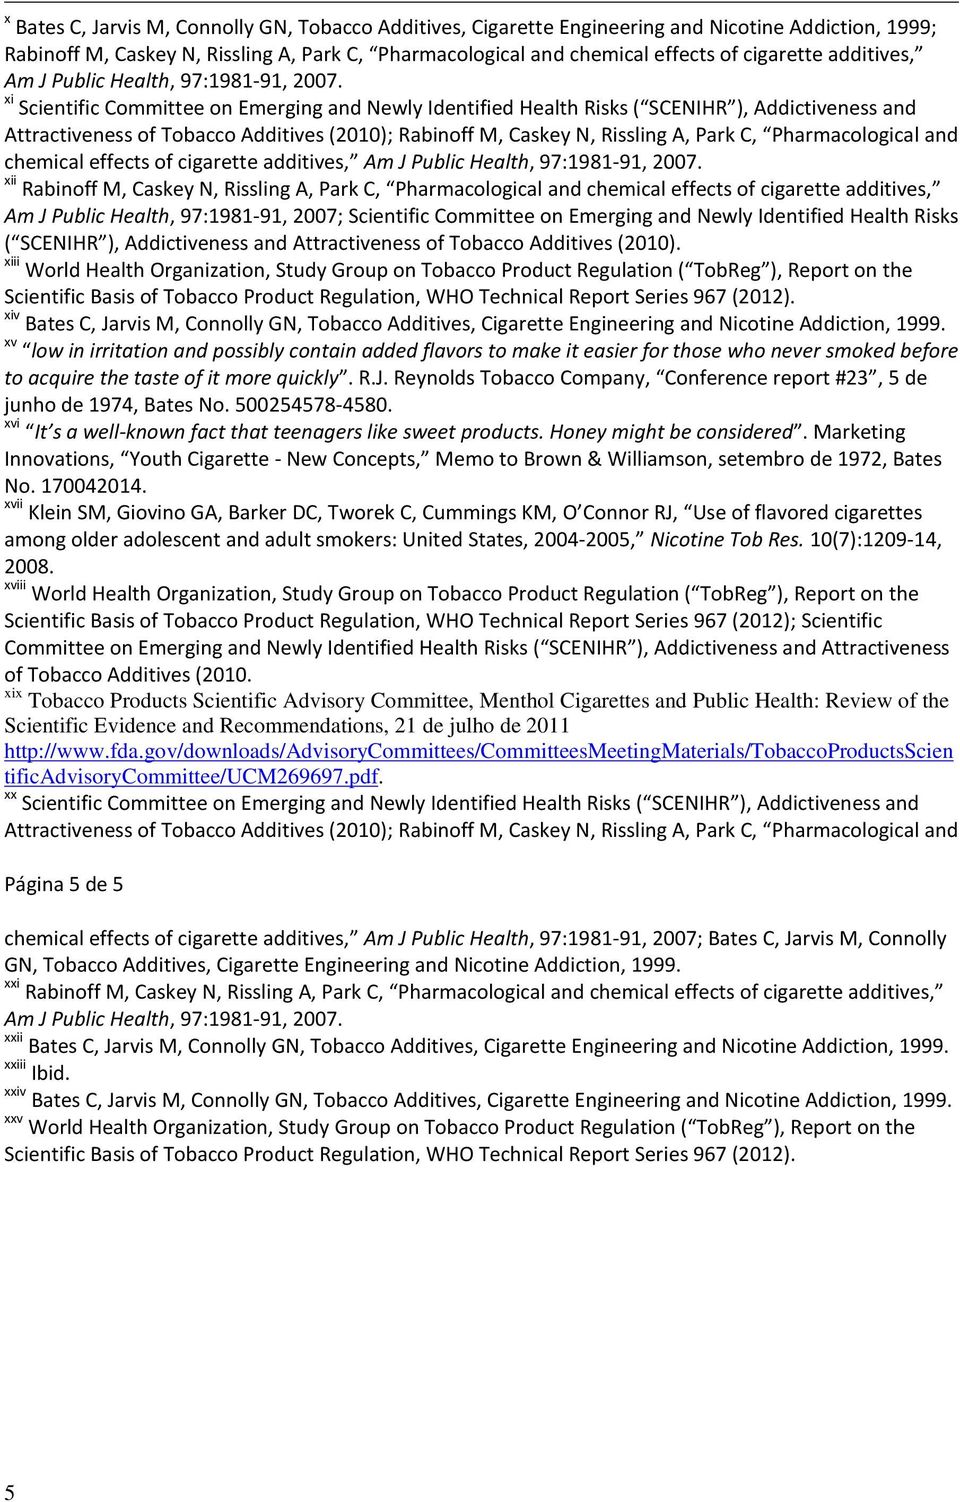 xi Scientific Committee on Emerging and Newly Identified Health Risks ( SCENIHR ), Addictiveness and Attractiveness of Tobacco Additives (2010); Rabinoff M, Caskey N, Rissling A, Park C,